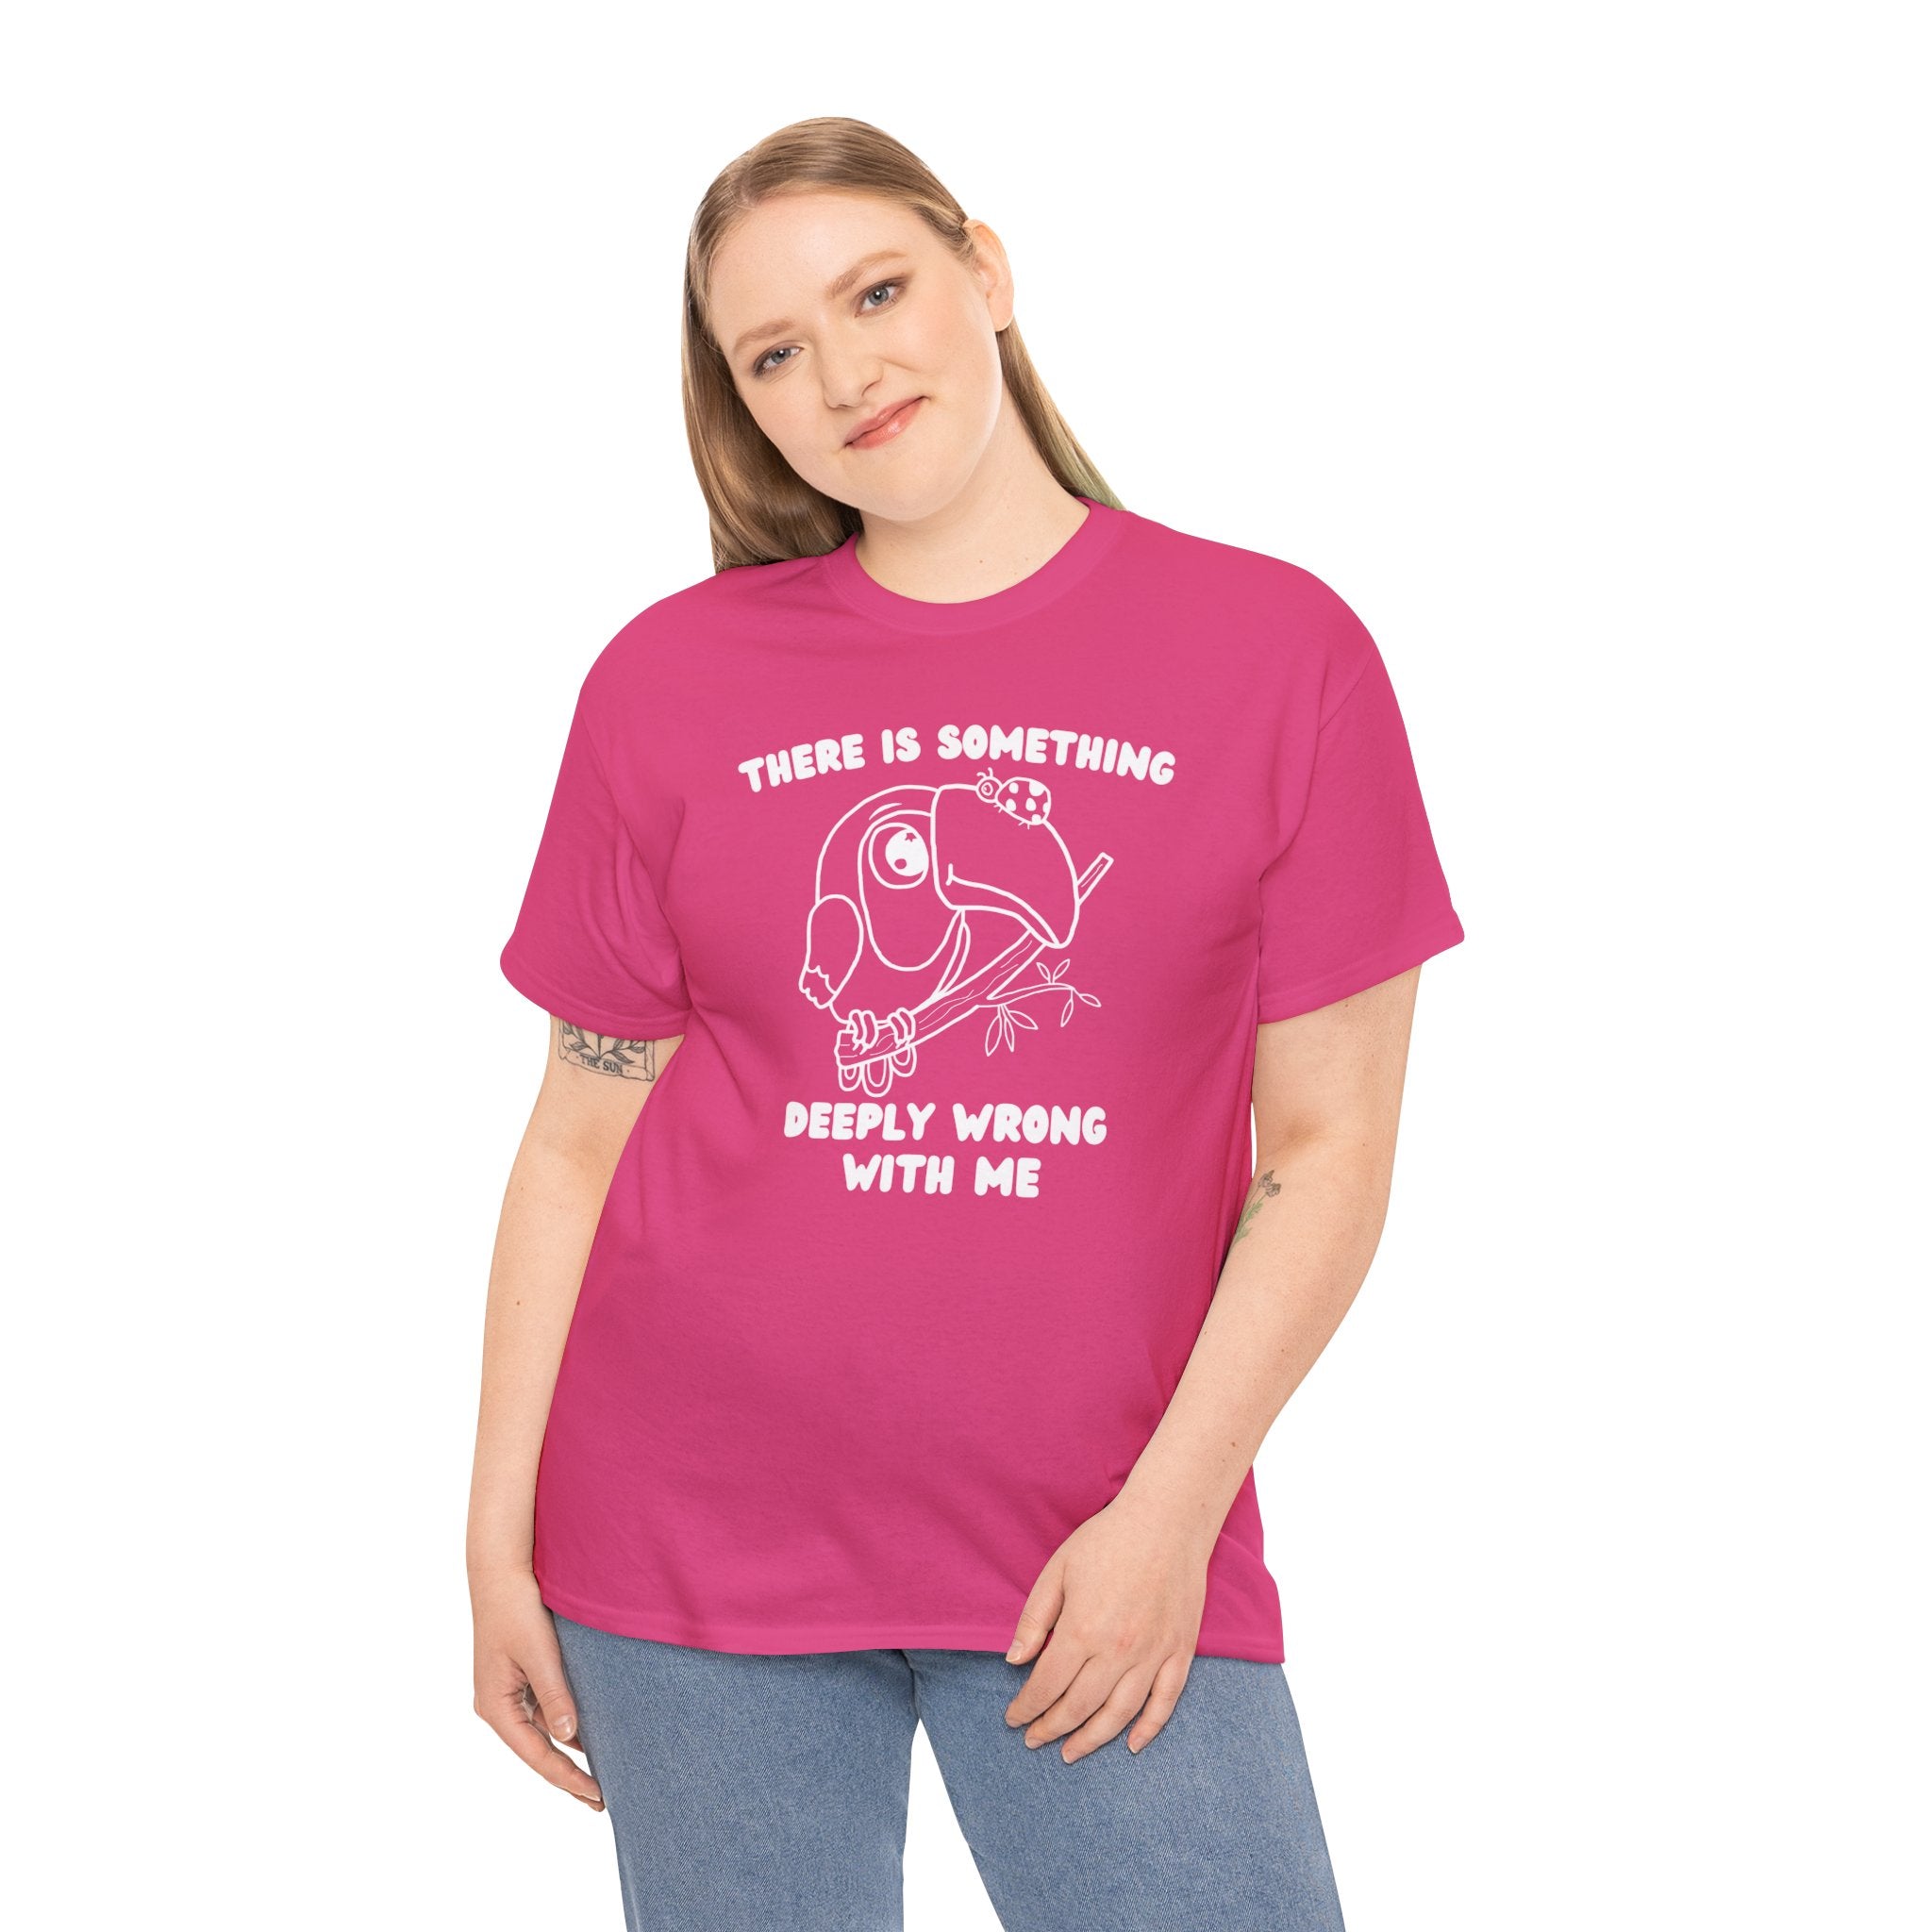 There is something deeply wrong with me shirt